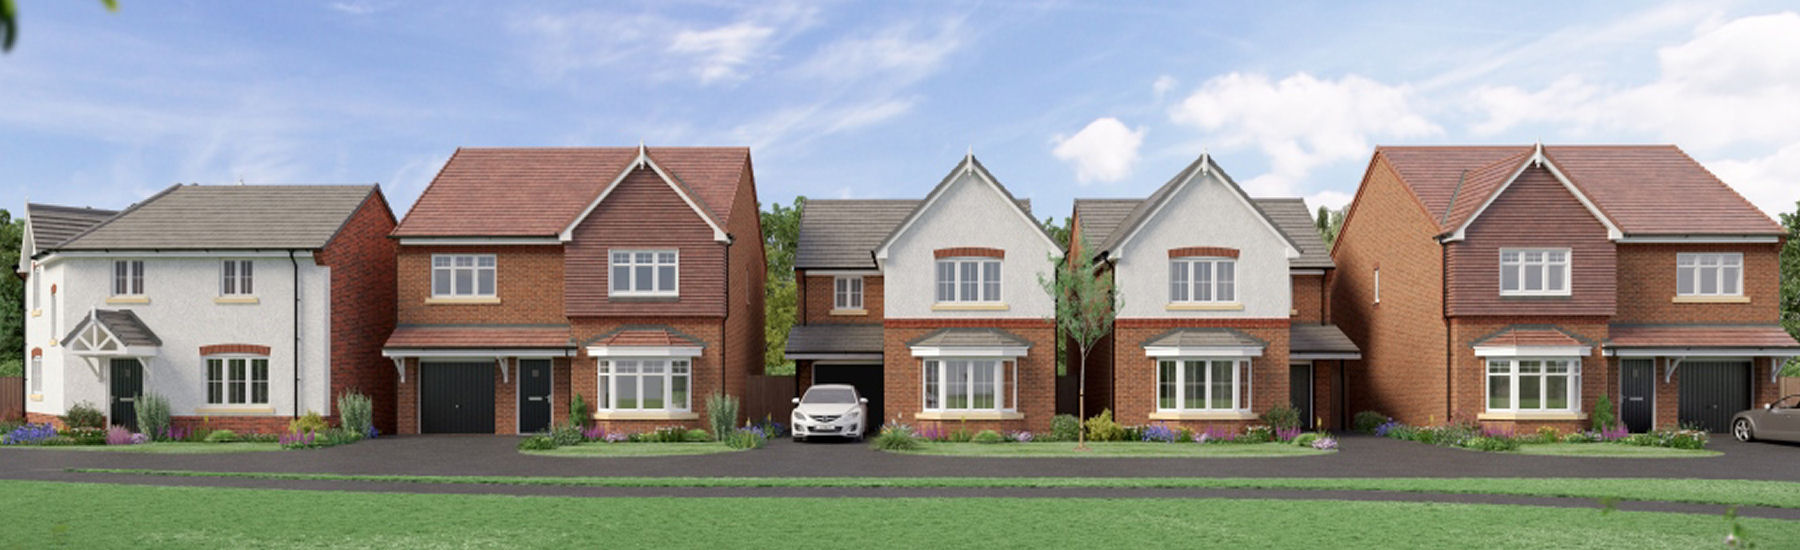 New Build Homes Telford Uk 1 5 Bedroom Homes For Sale